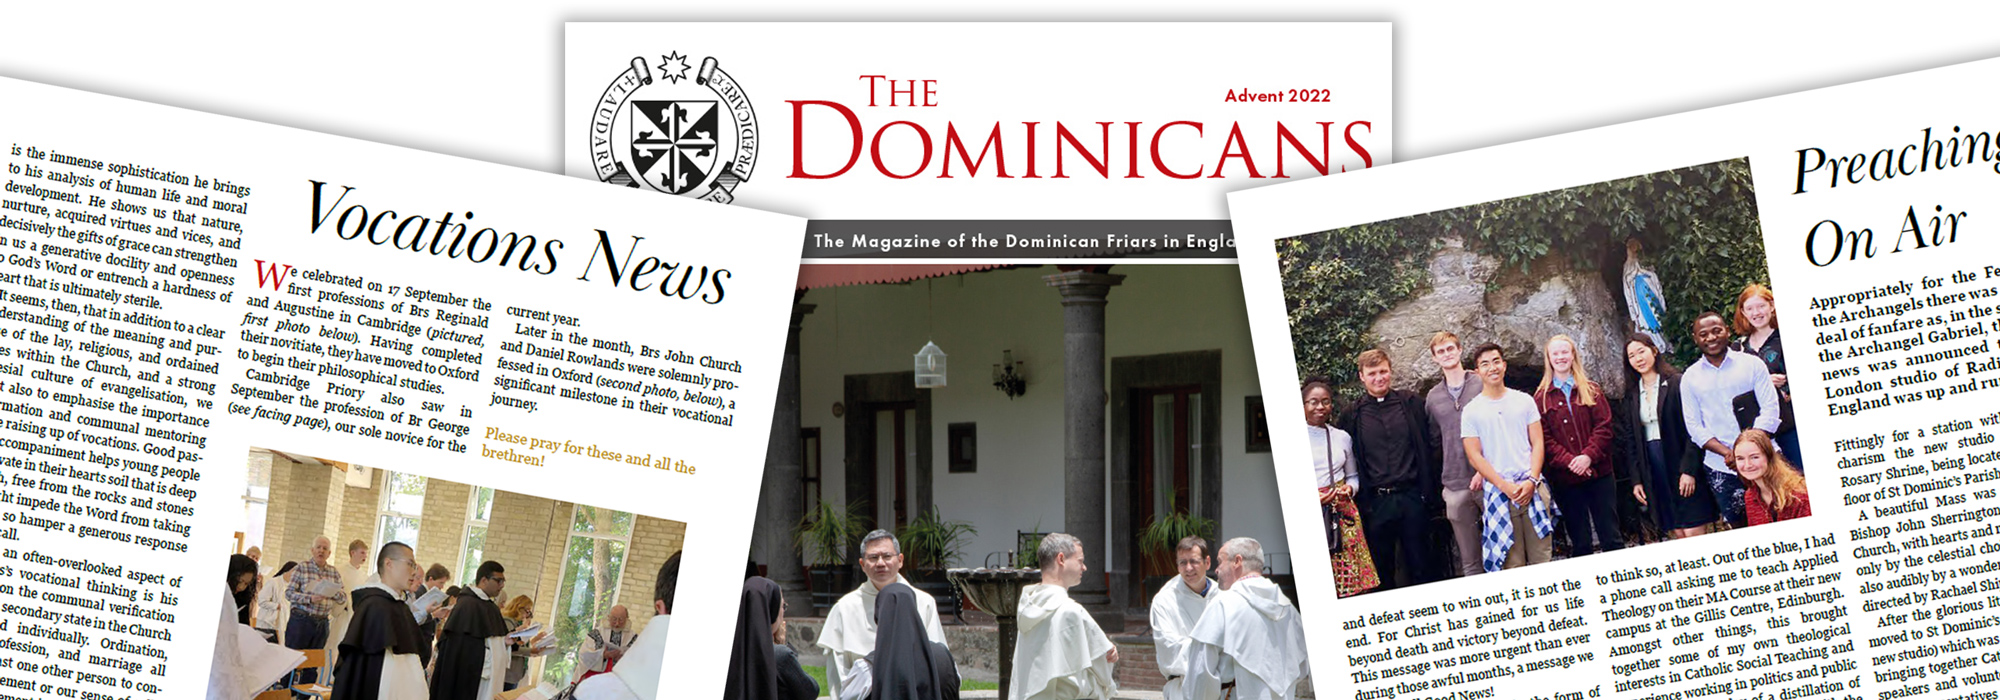 New Issue of ‘The Dominicans’ magazine